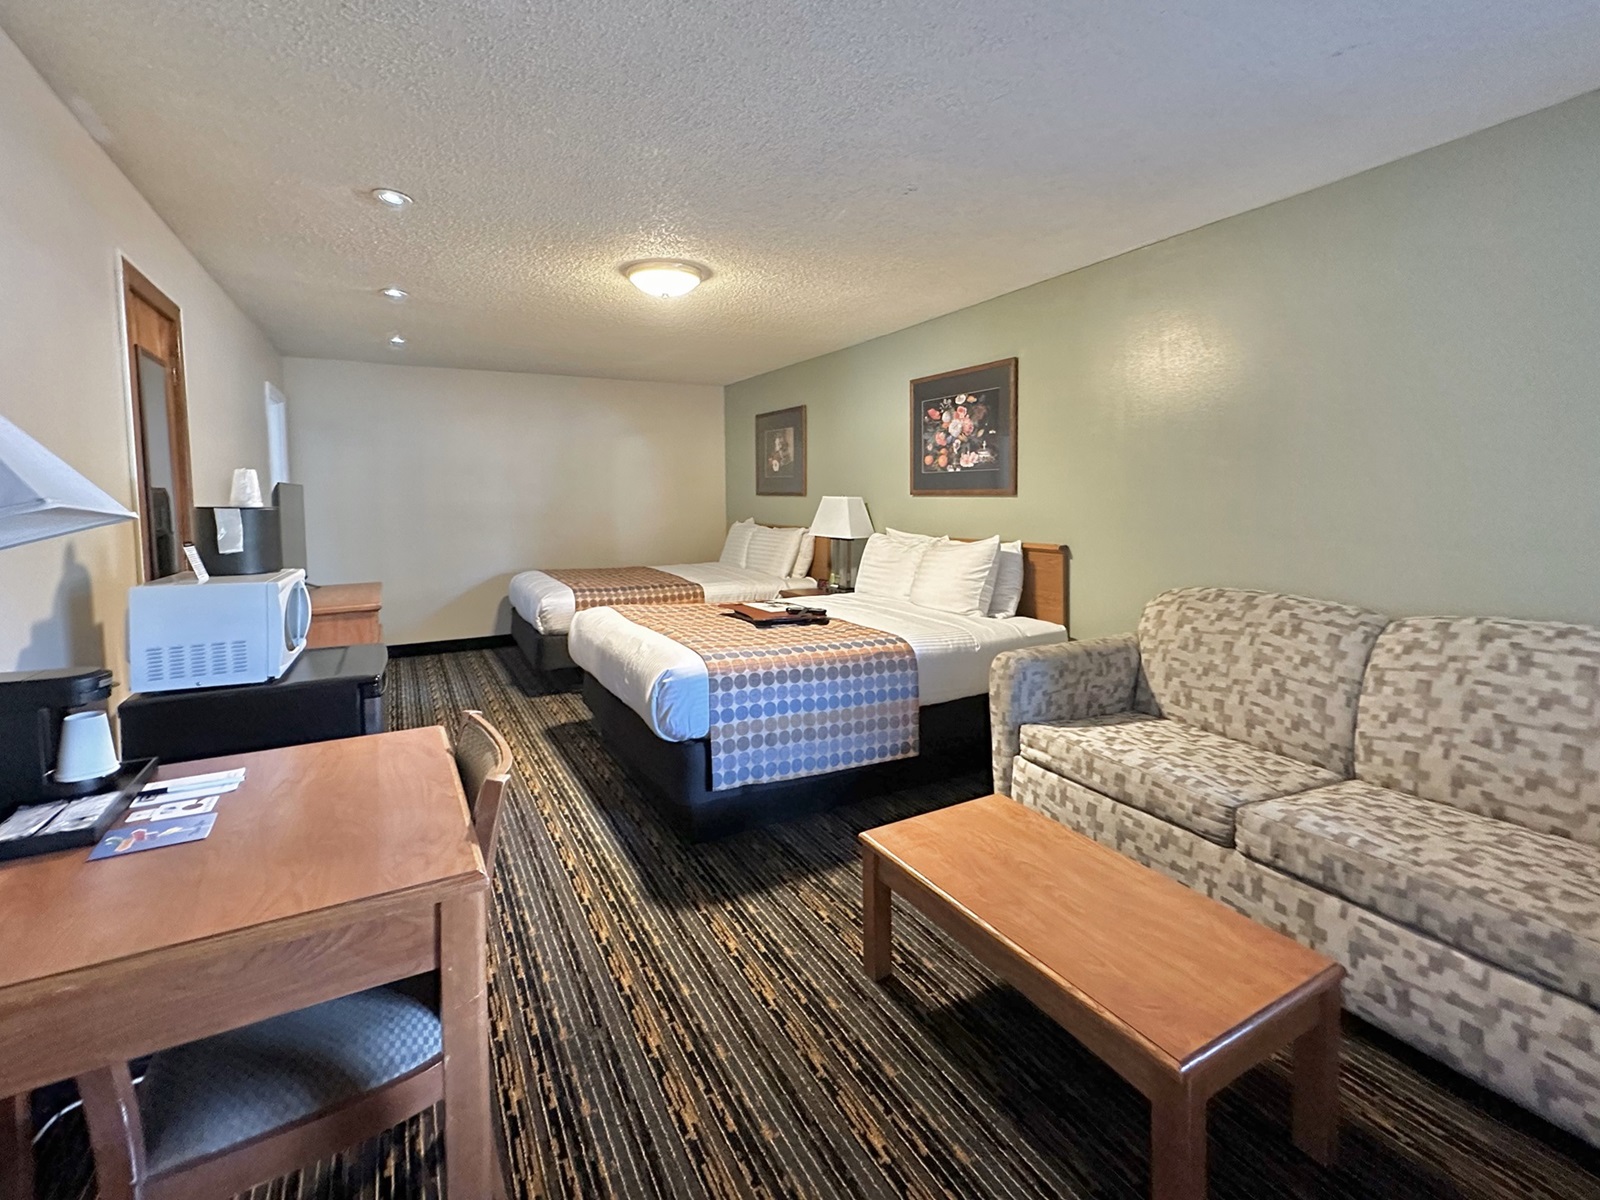 Need Extra Space? Explore Our Three-Bedroom Hotel Rooms at Courtesy Inn Eugene!